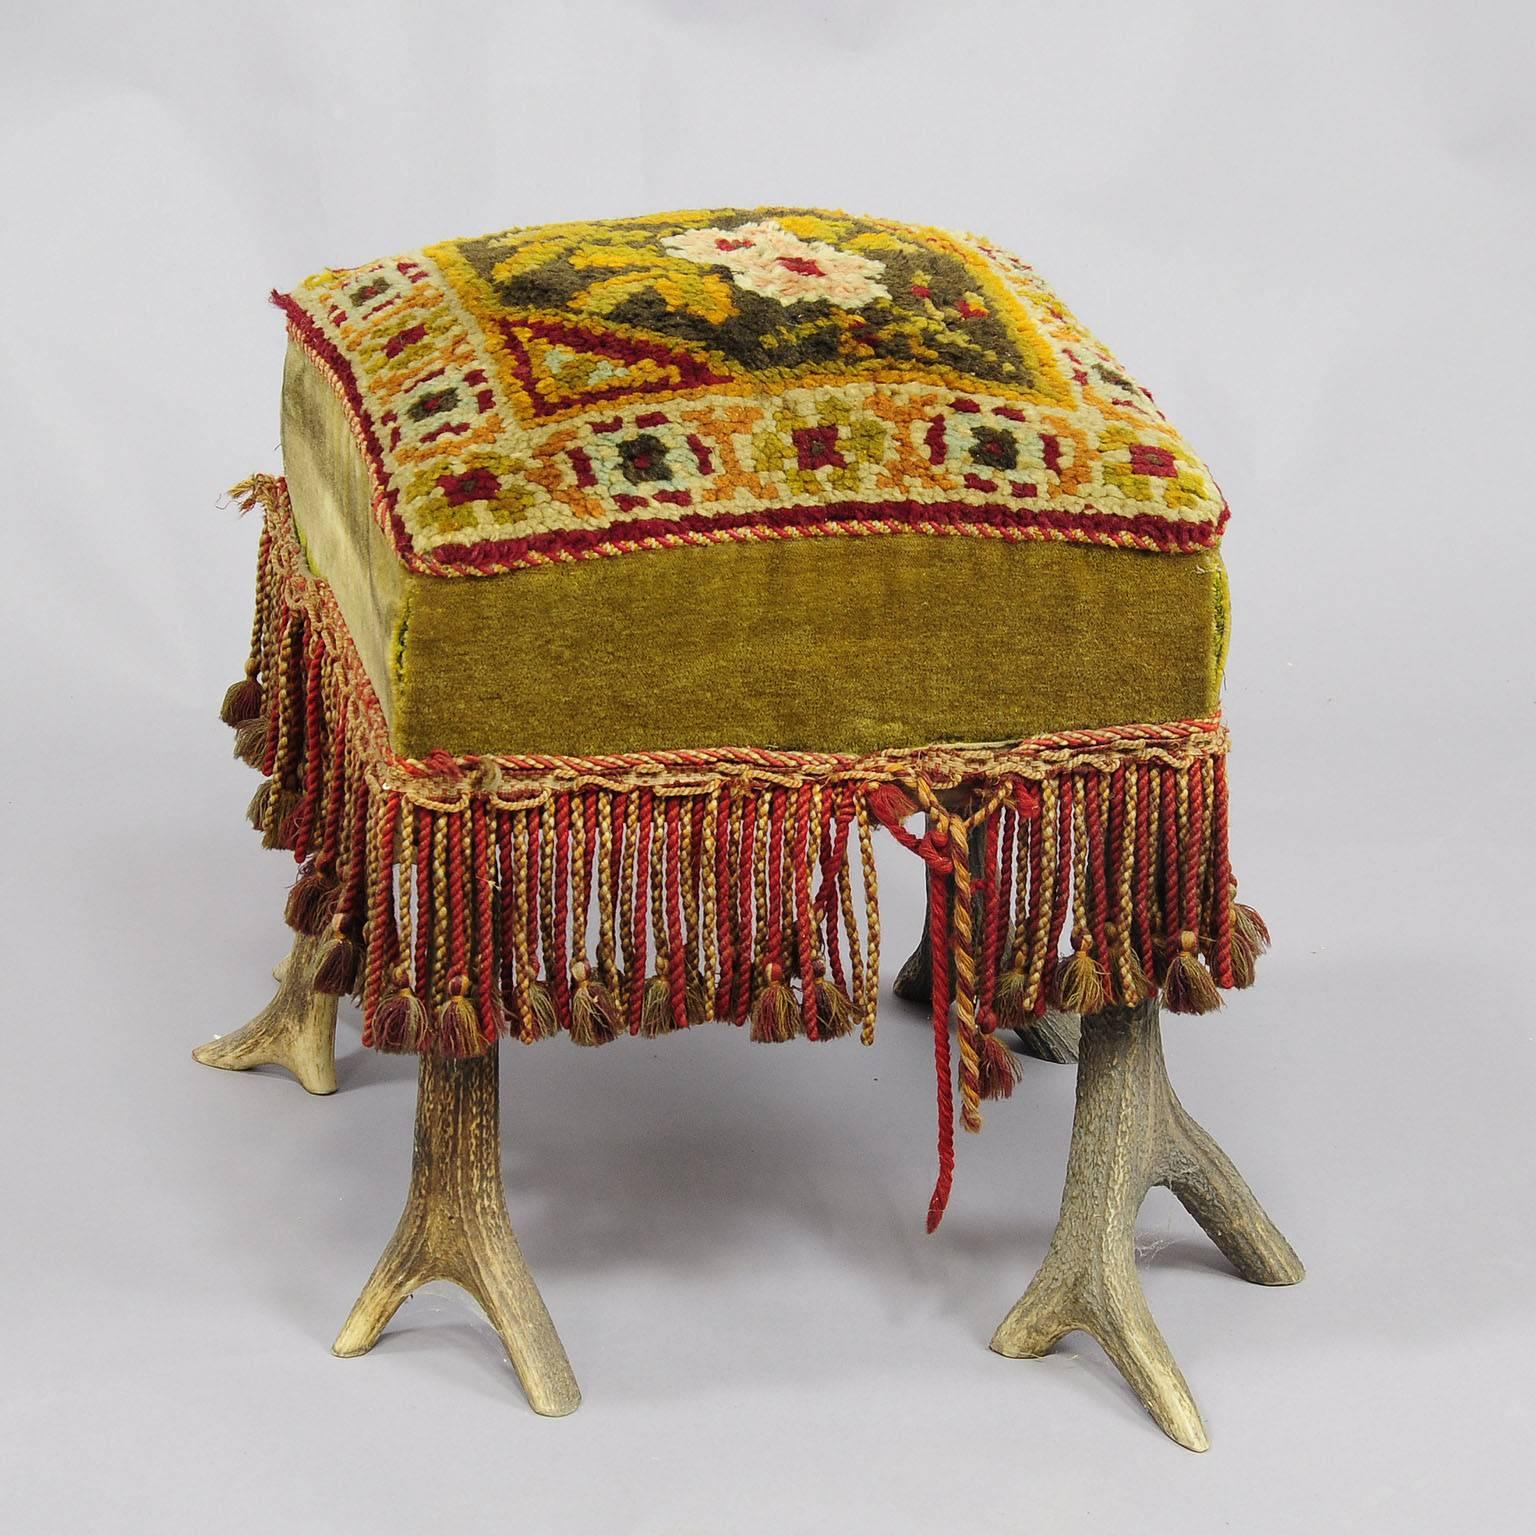 Folk Art Antique Antler Stool with Hand-Woven Seating Surface